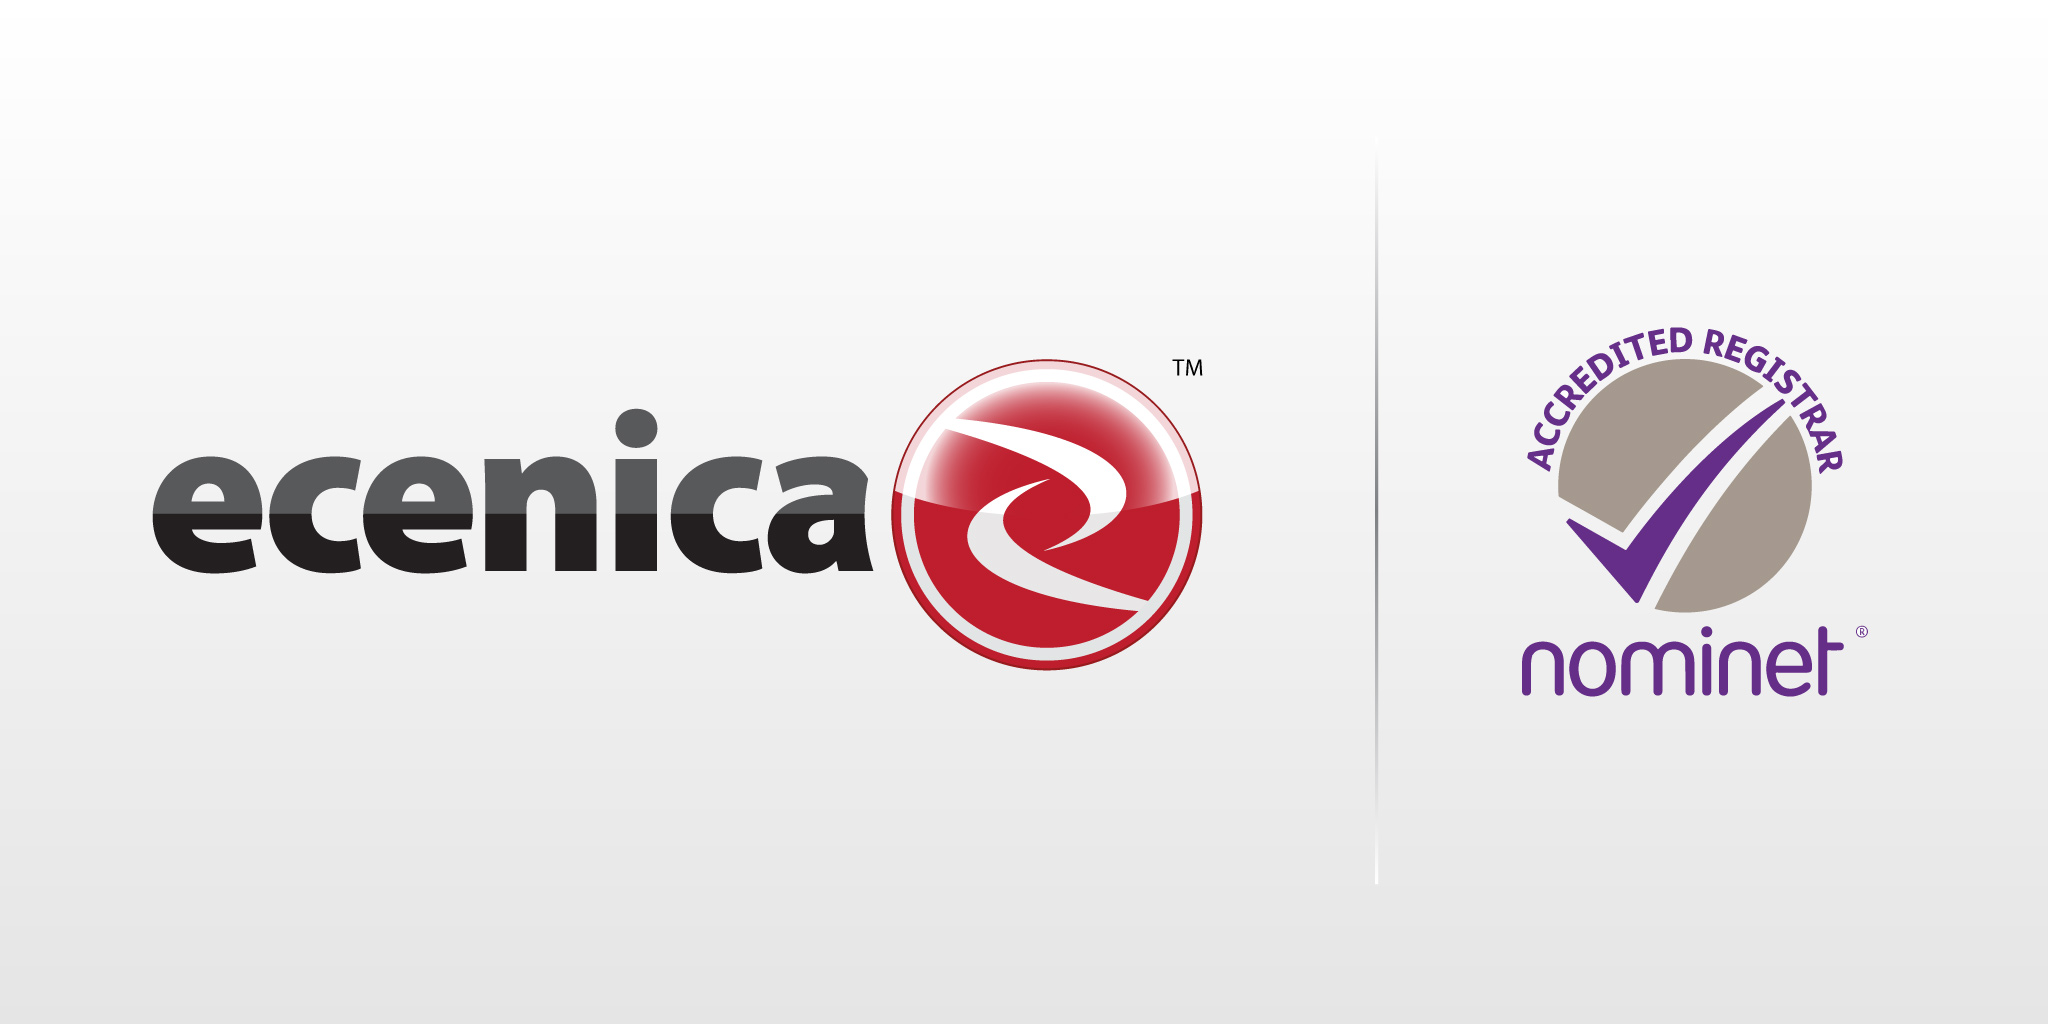 Ecenica is now a Nominet Accredited Partner